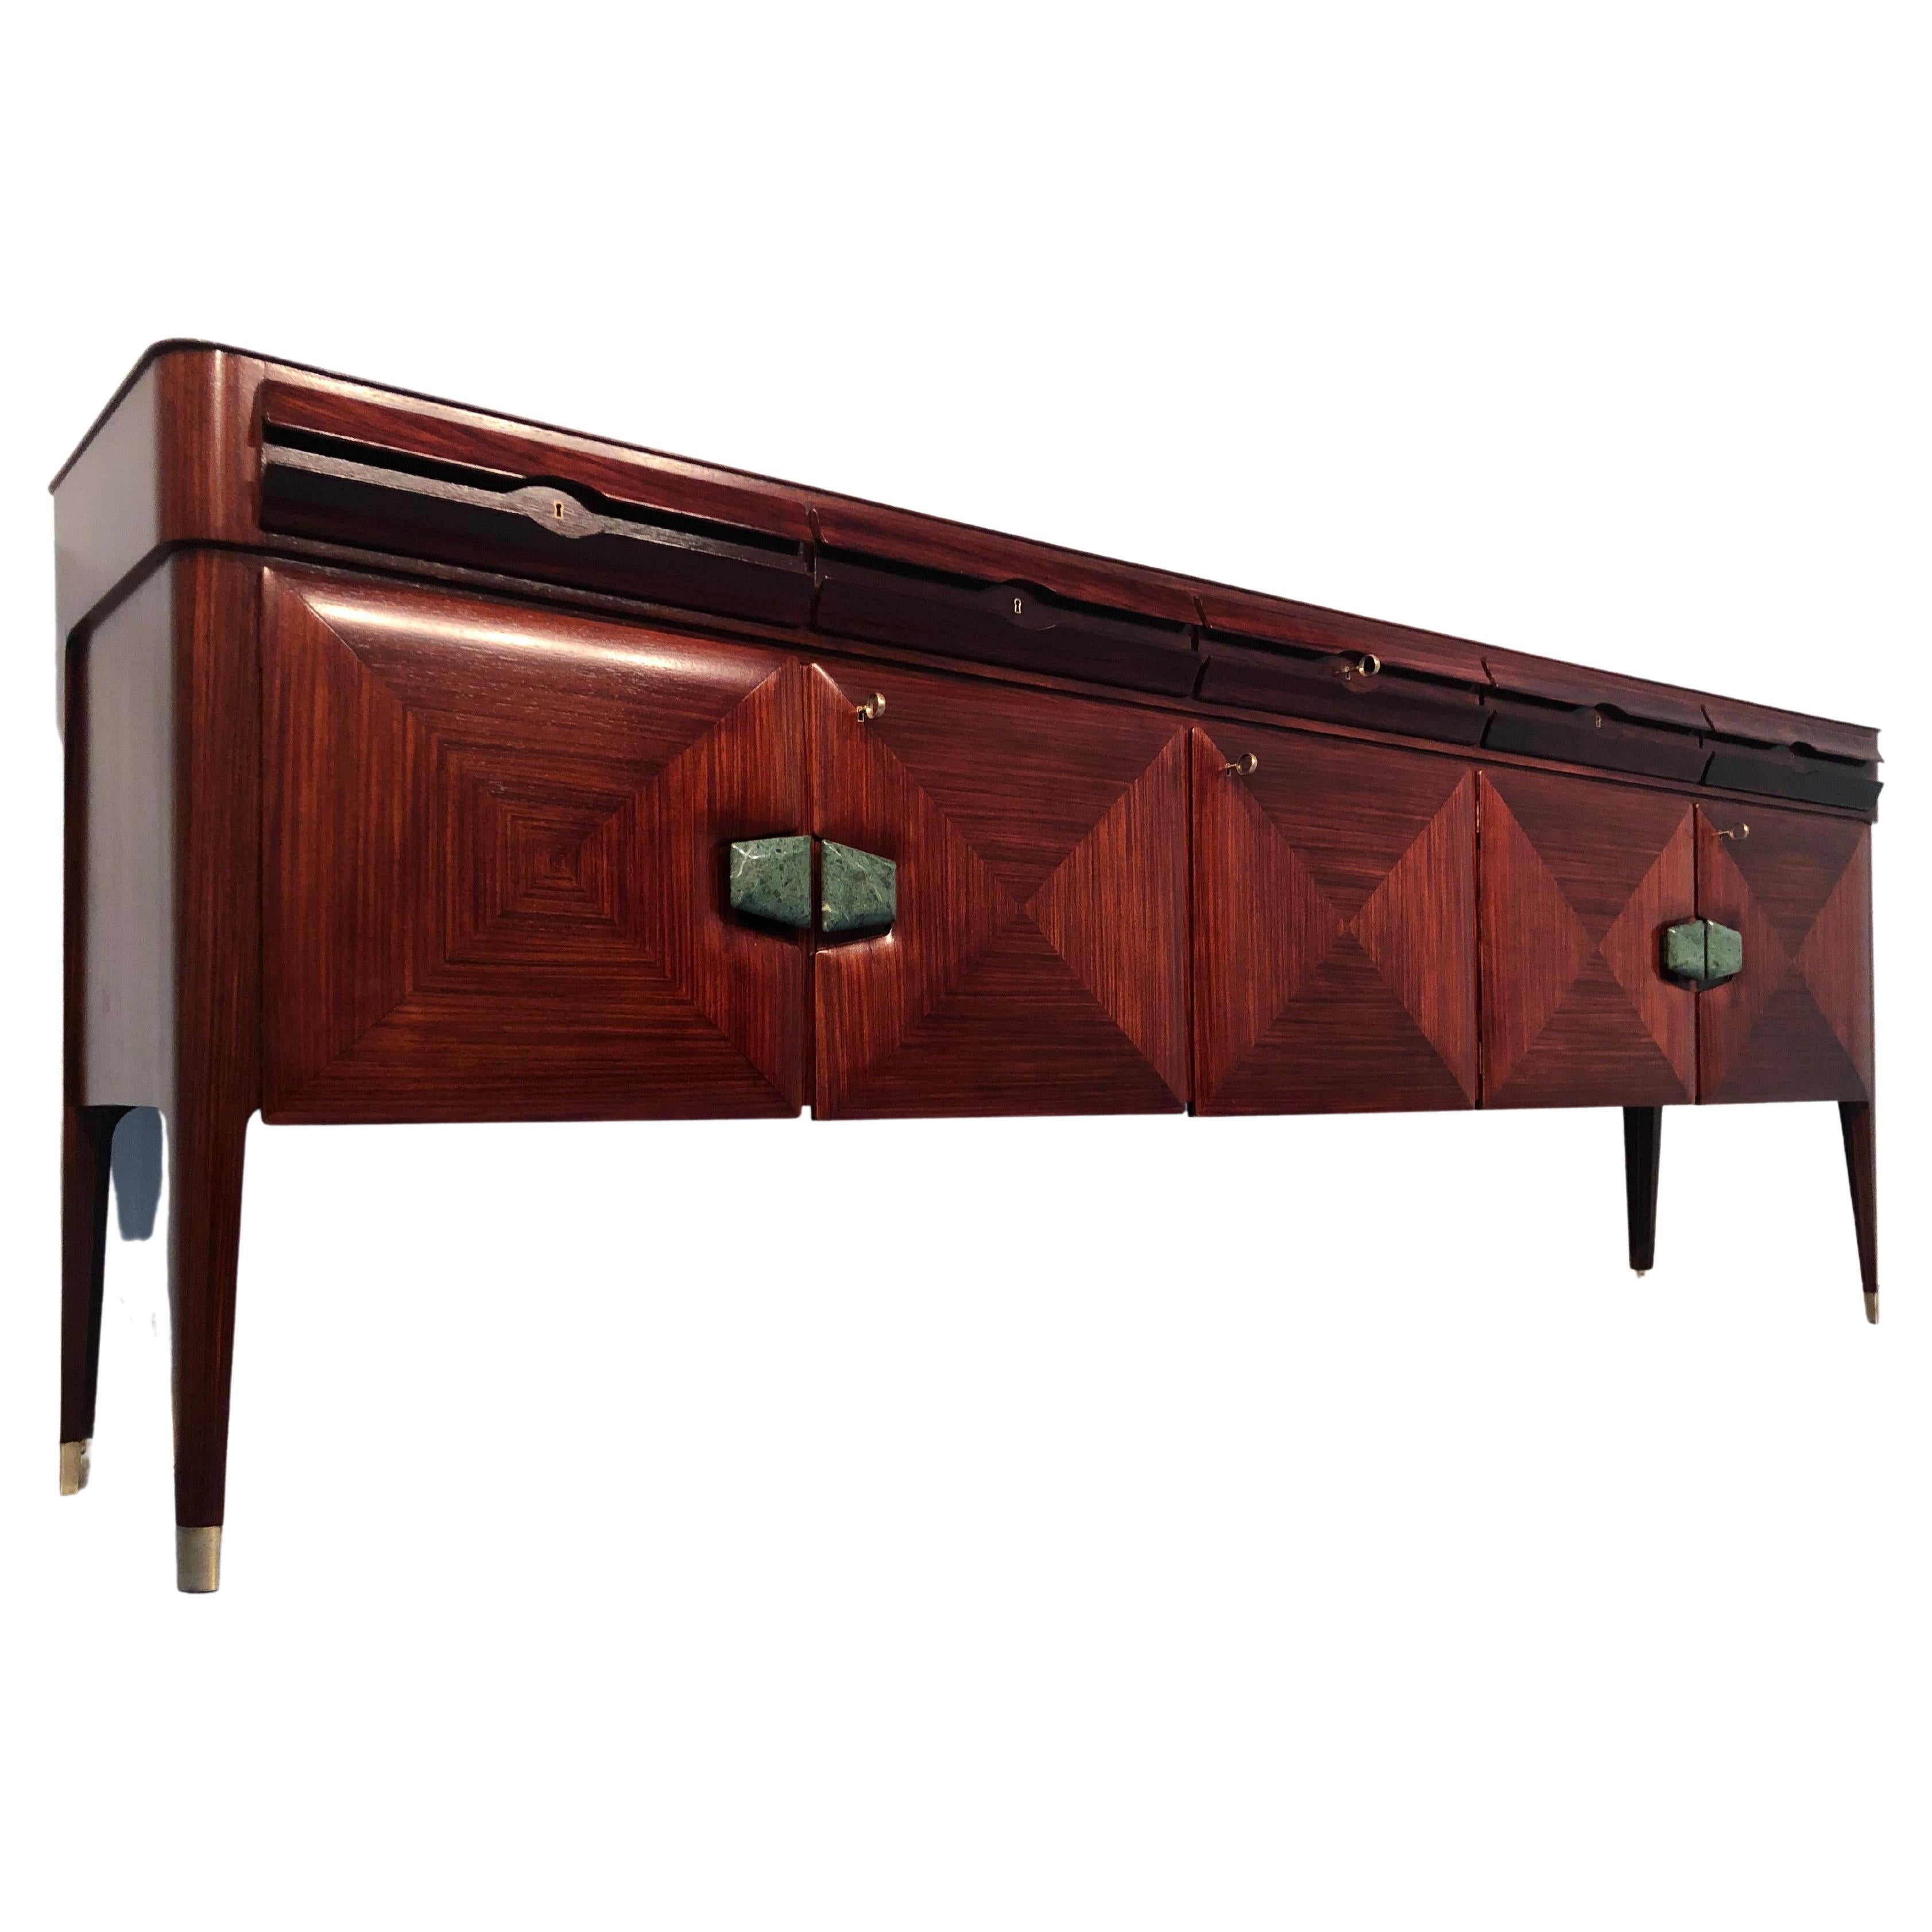 Stylish Italian mid-century sideboard made by Vittorio and Plinio Dassi per La Permanente Mobile di Cantù in the 1950s. Glass top, green marble handles from Alpi. Feet finish with brass sabot. It has five drawers with a unique style. The interiors